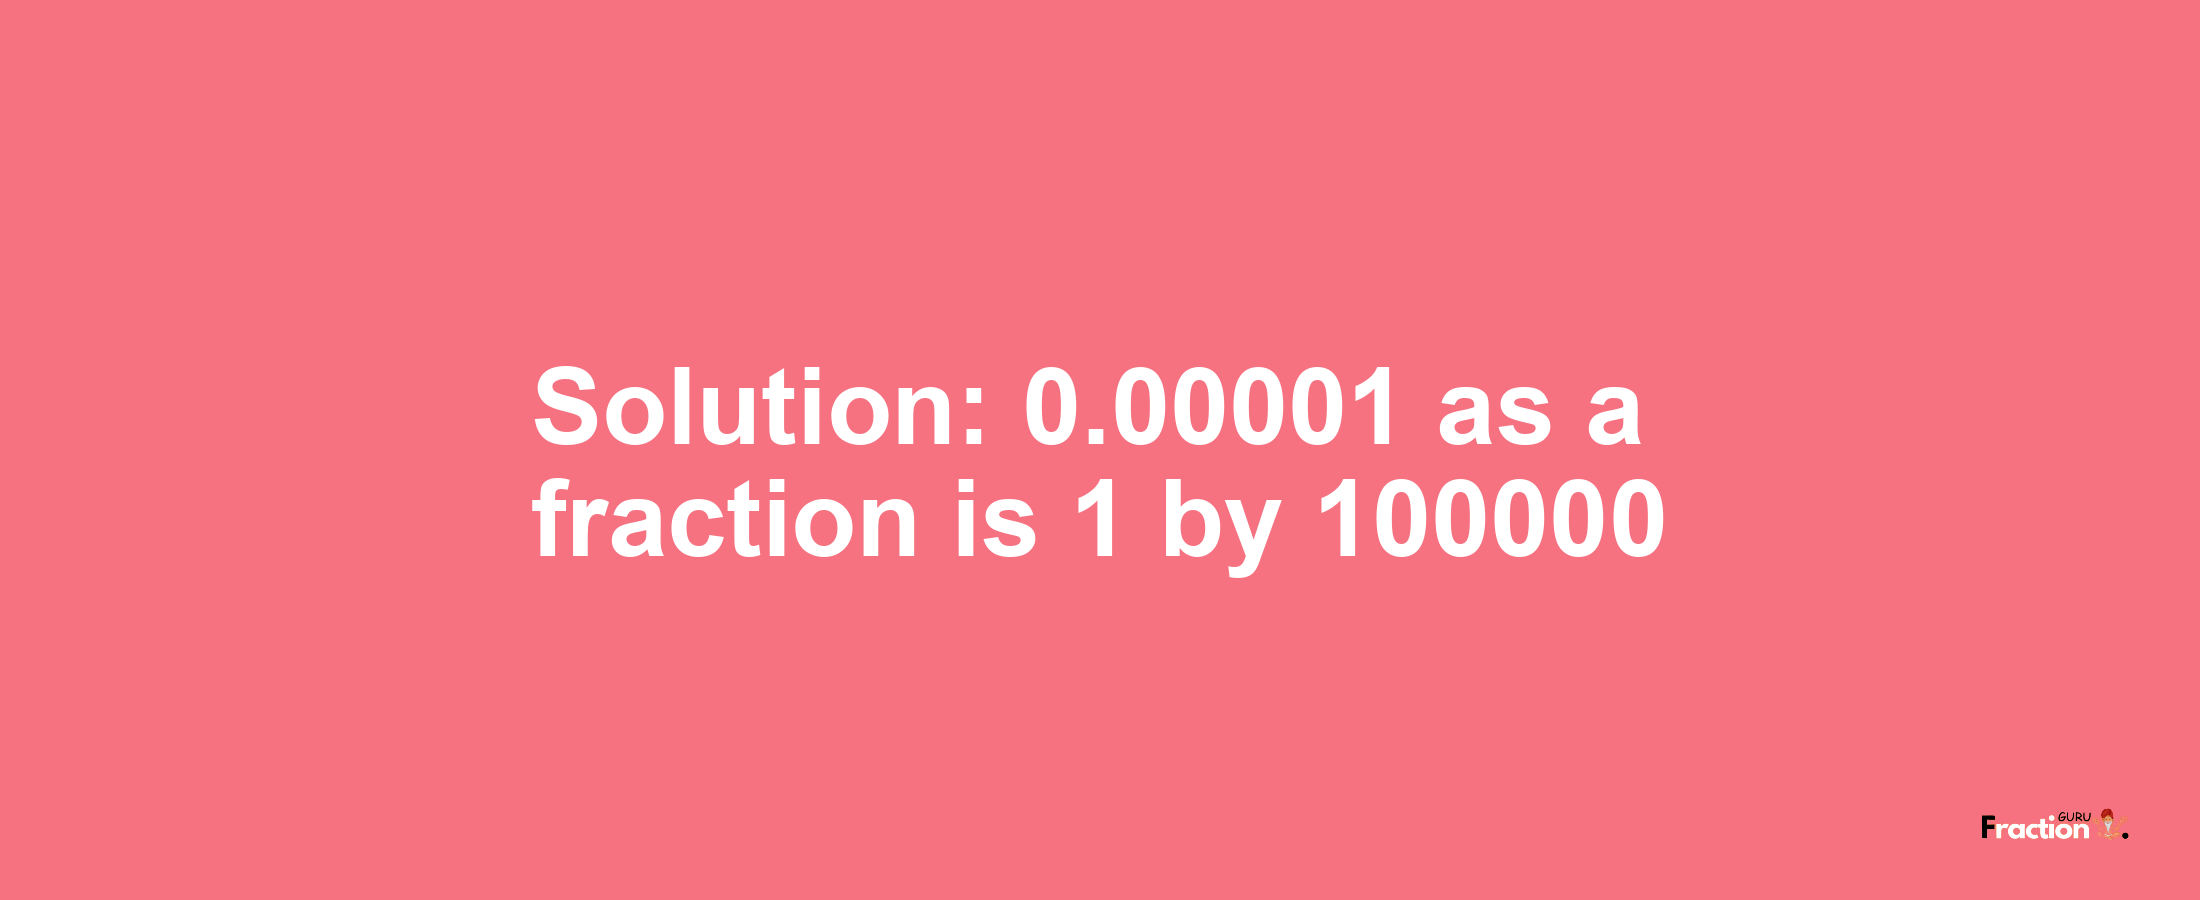 Solution:0.00001 as a fraction is 1/100000